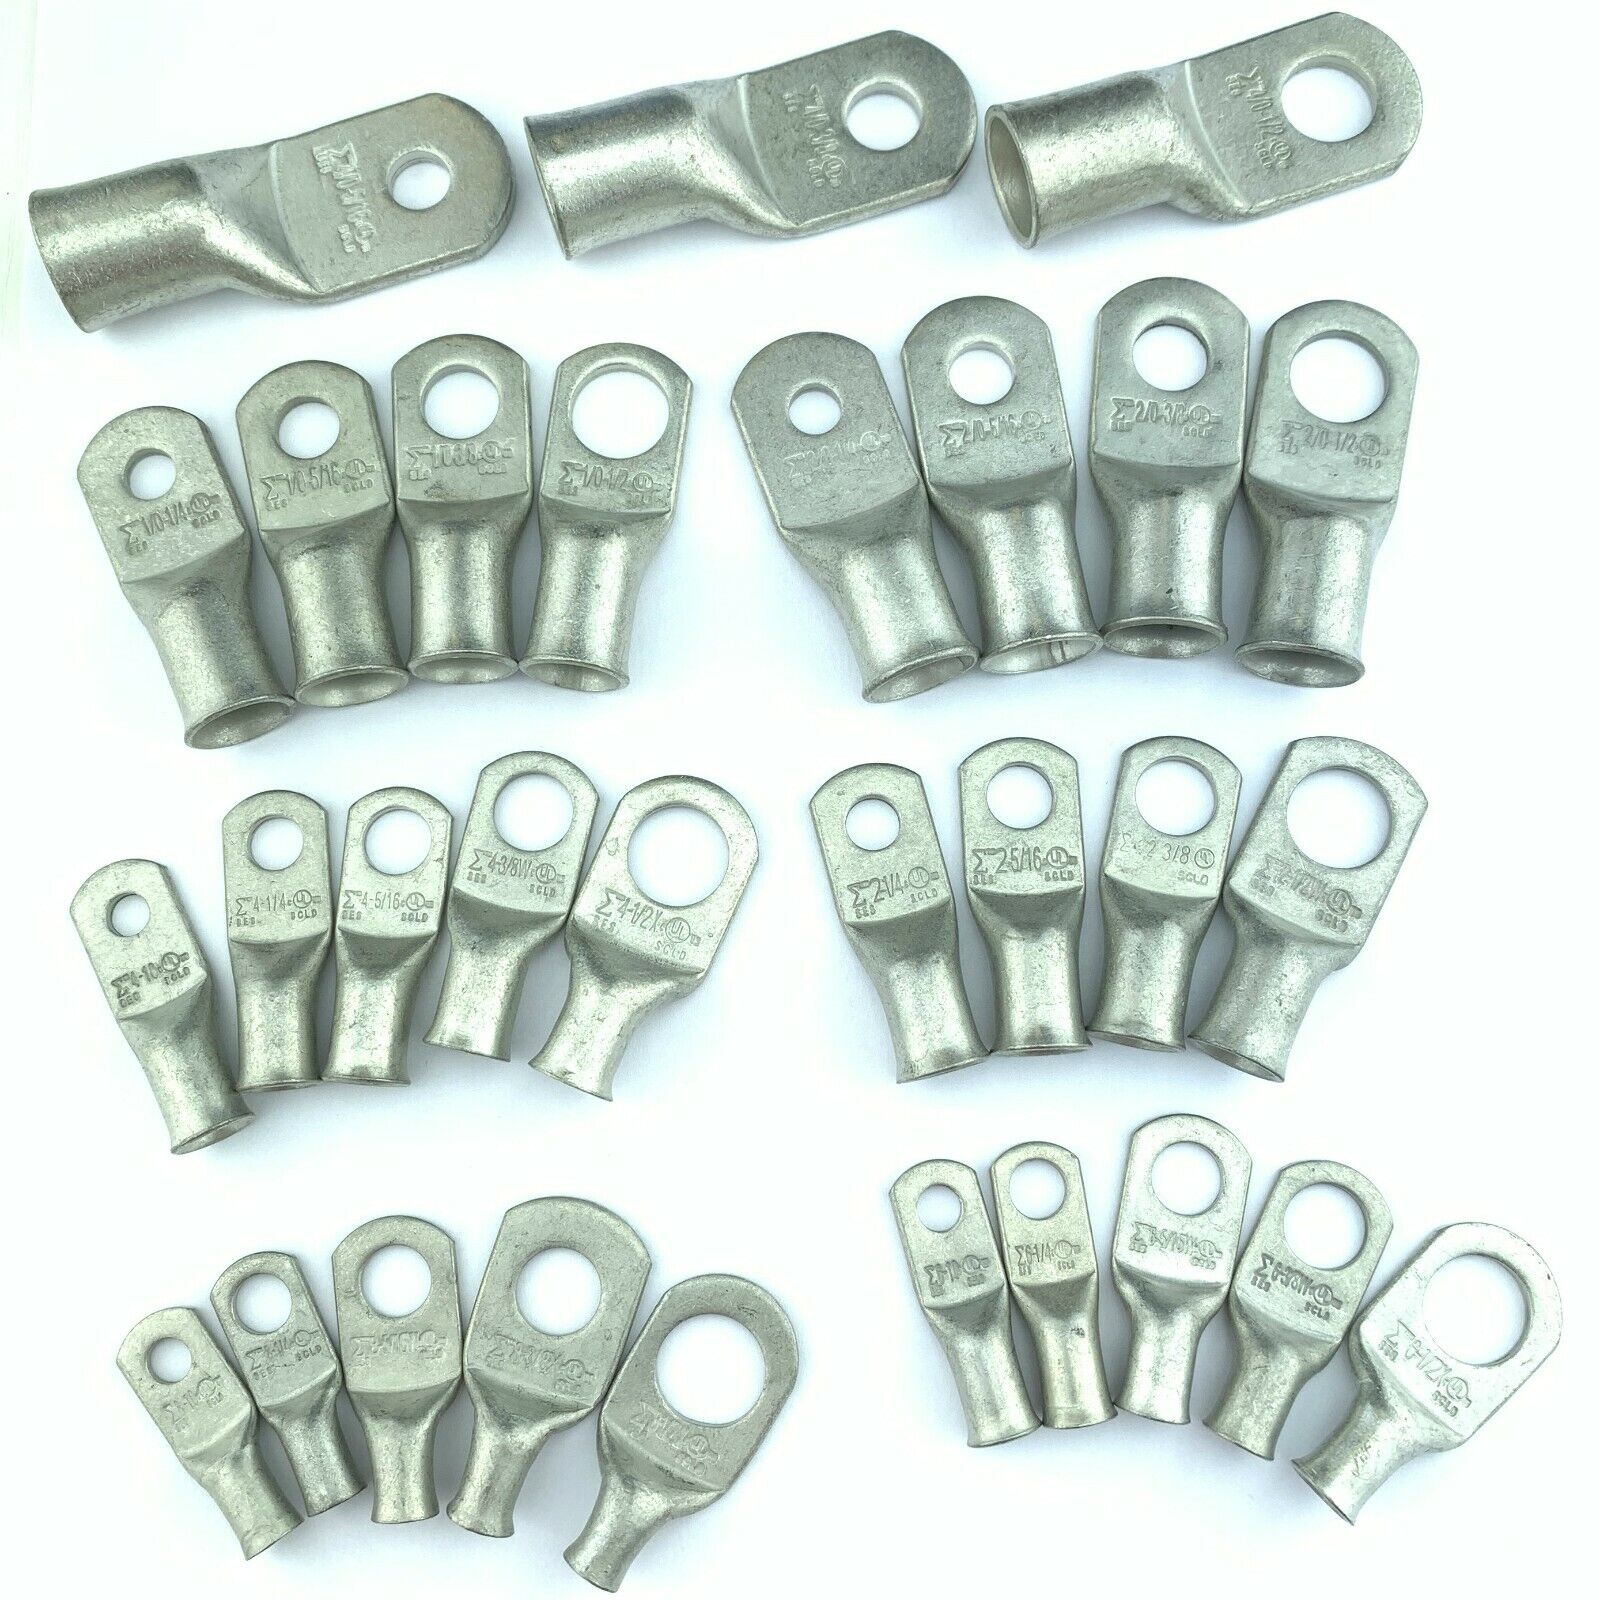 Battery Cable Ends, Lugs, Ring Terminals, Connectors, Tin Plated Pure Copper Battery Cables USA LUGS